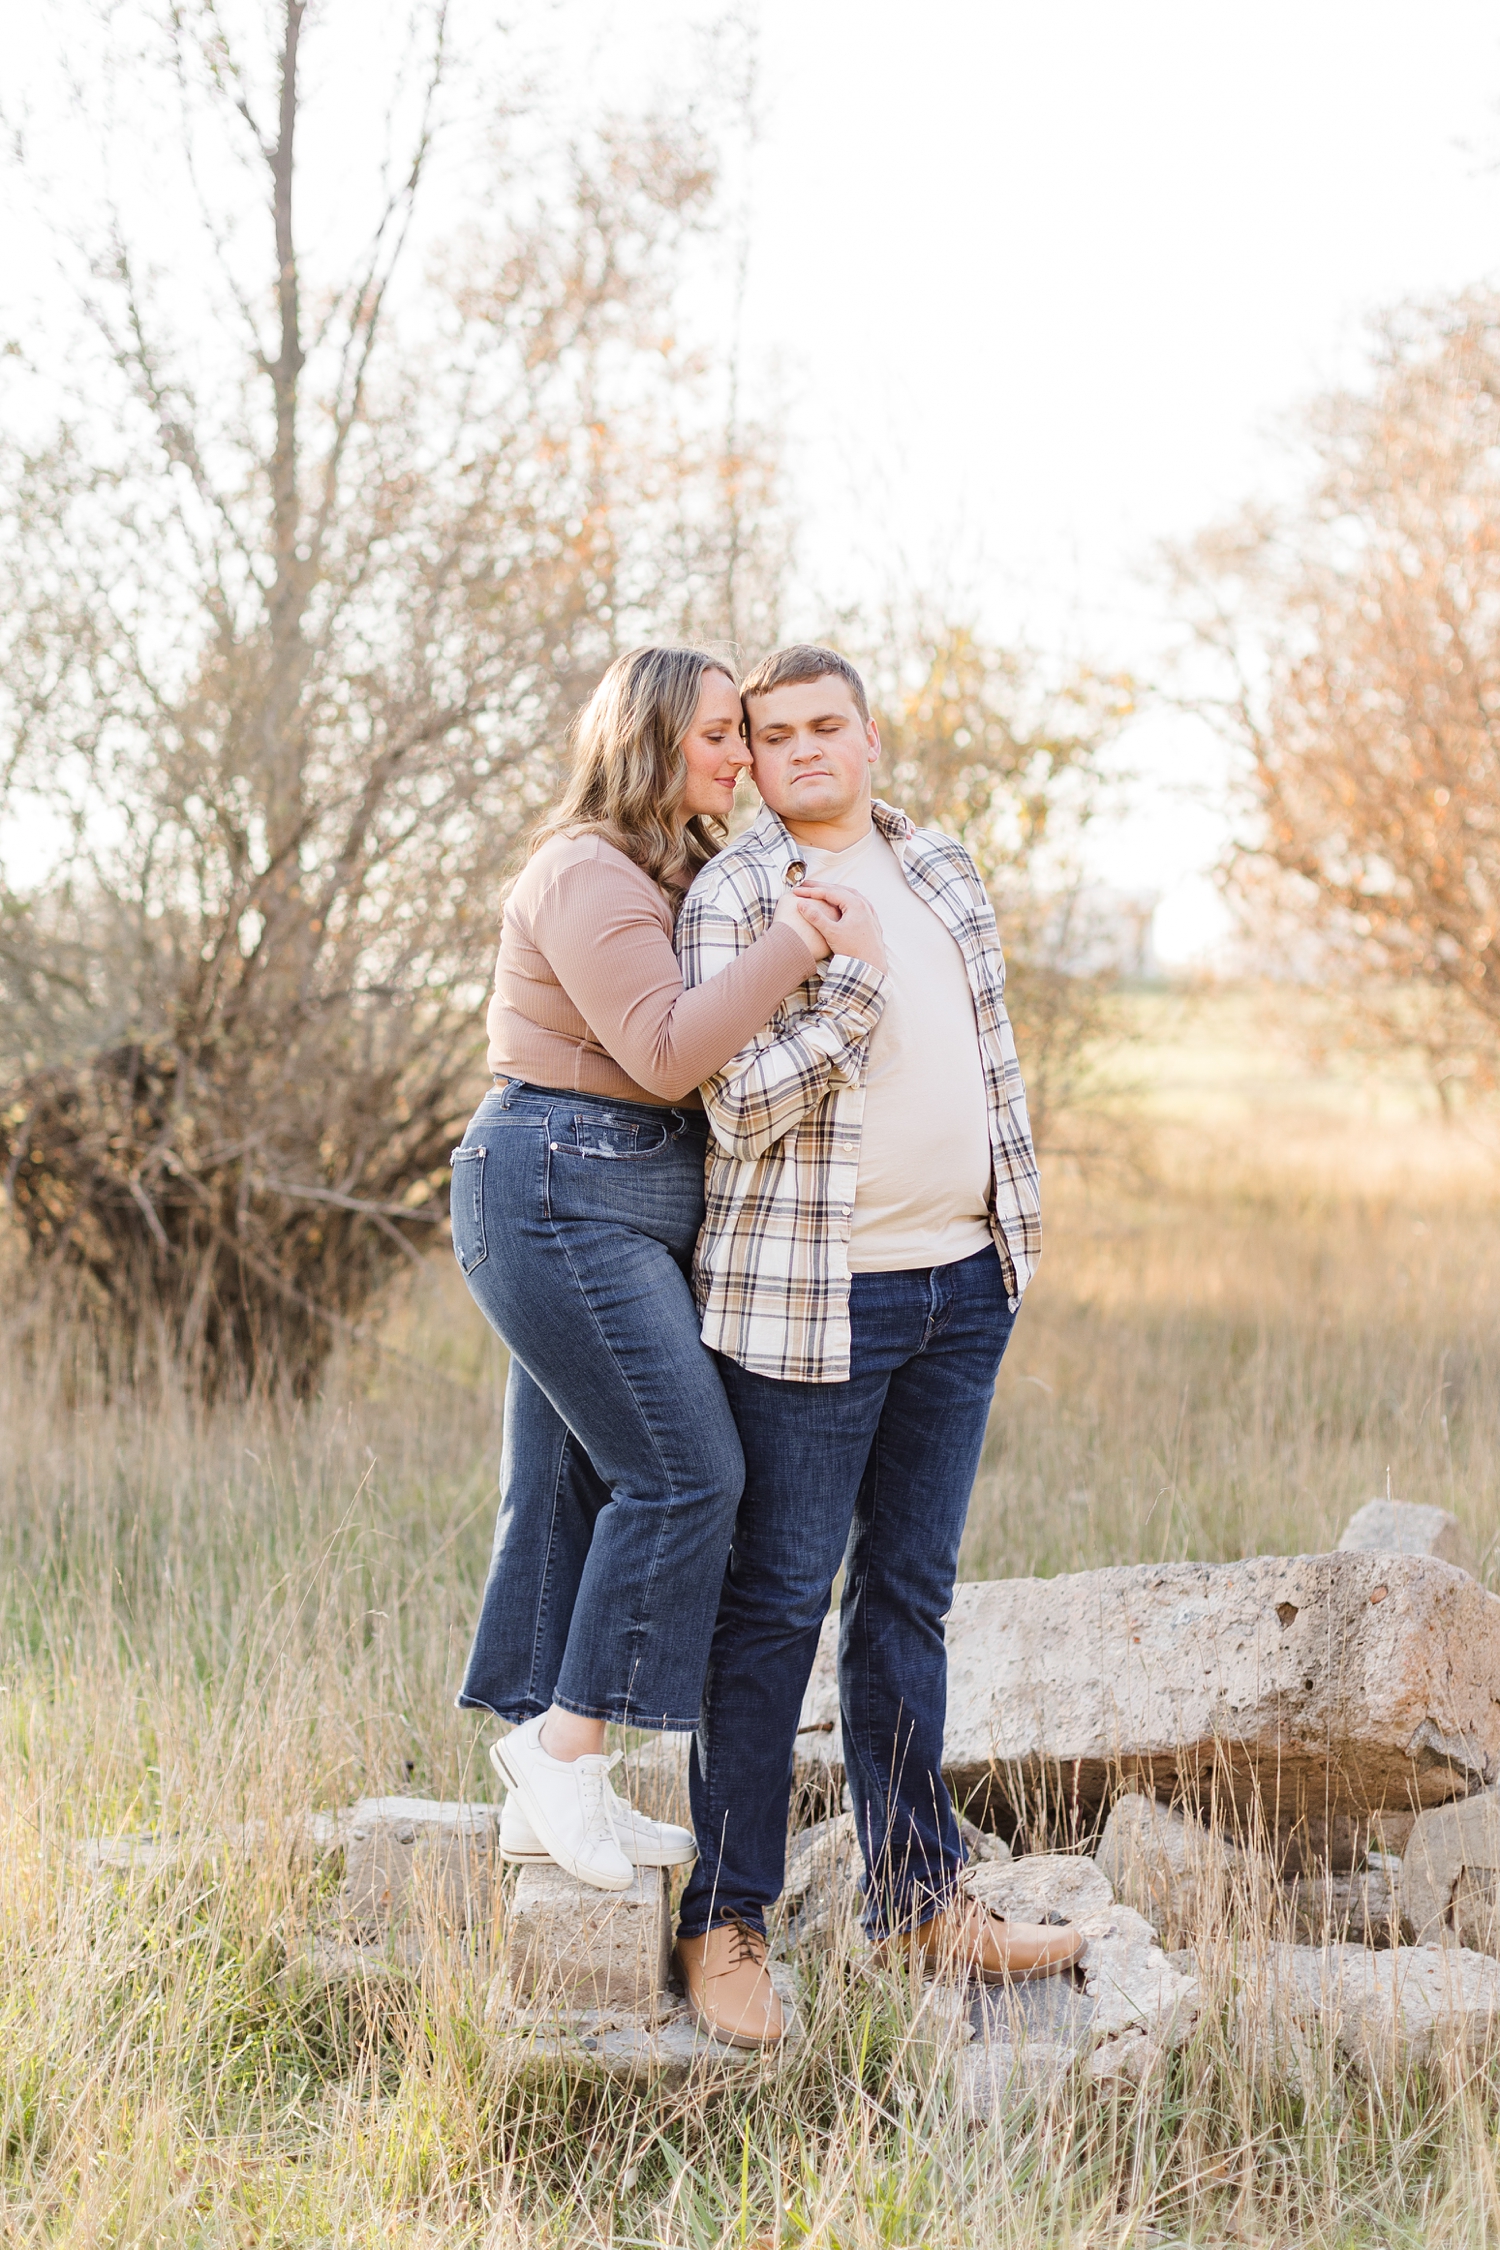 Taylor and Shelby embrace each other as they stand on a pile of rocks in the middle of a grassy field | CB Studio